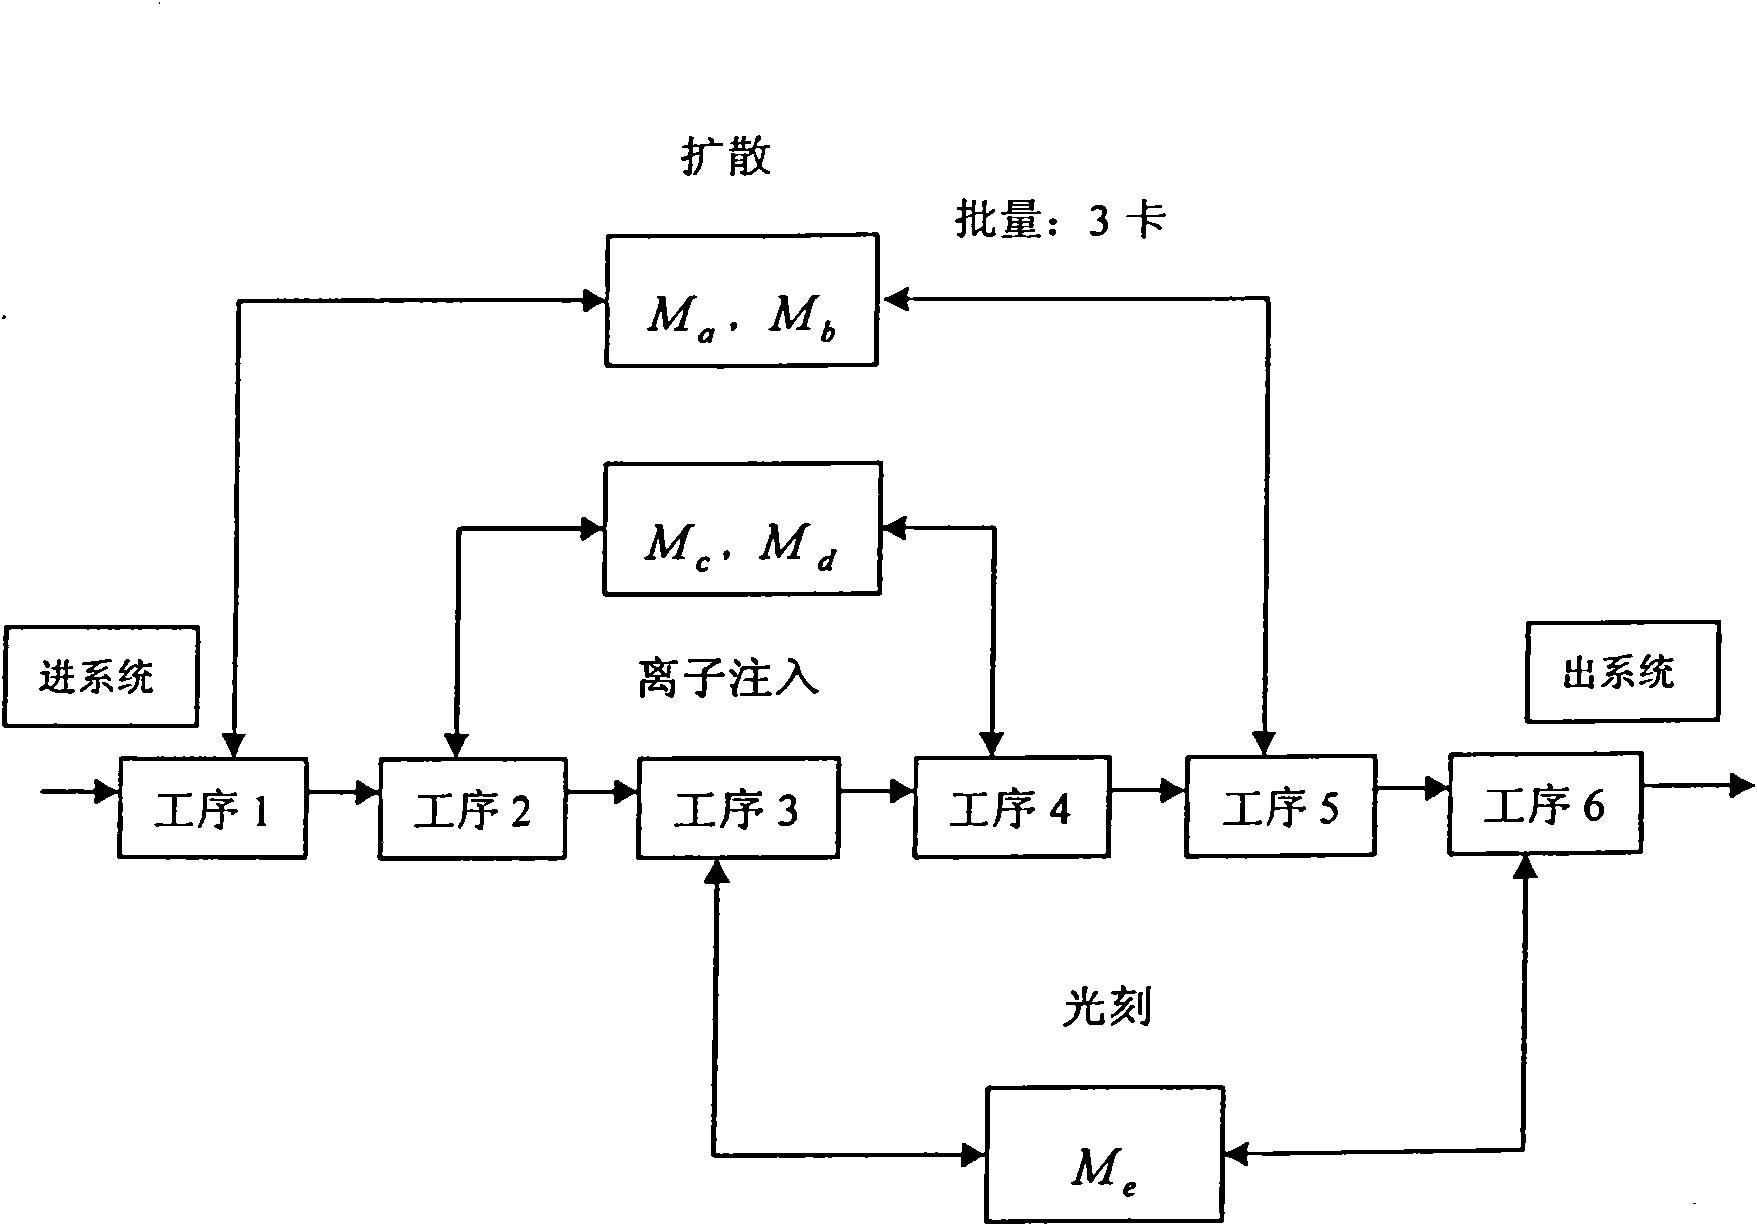 Mixing intelligent optimizing method for semiconductor production line production plan